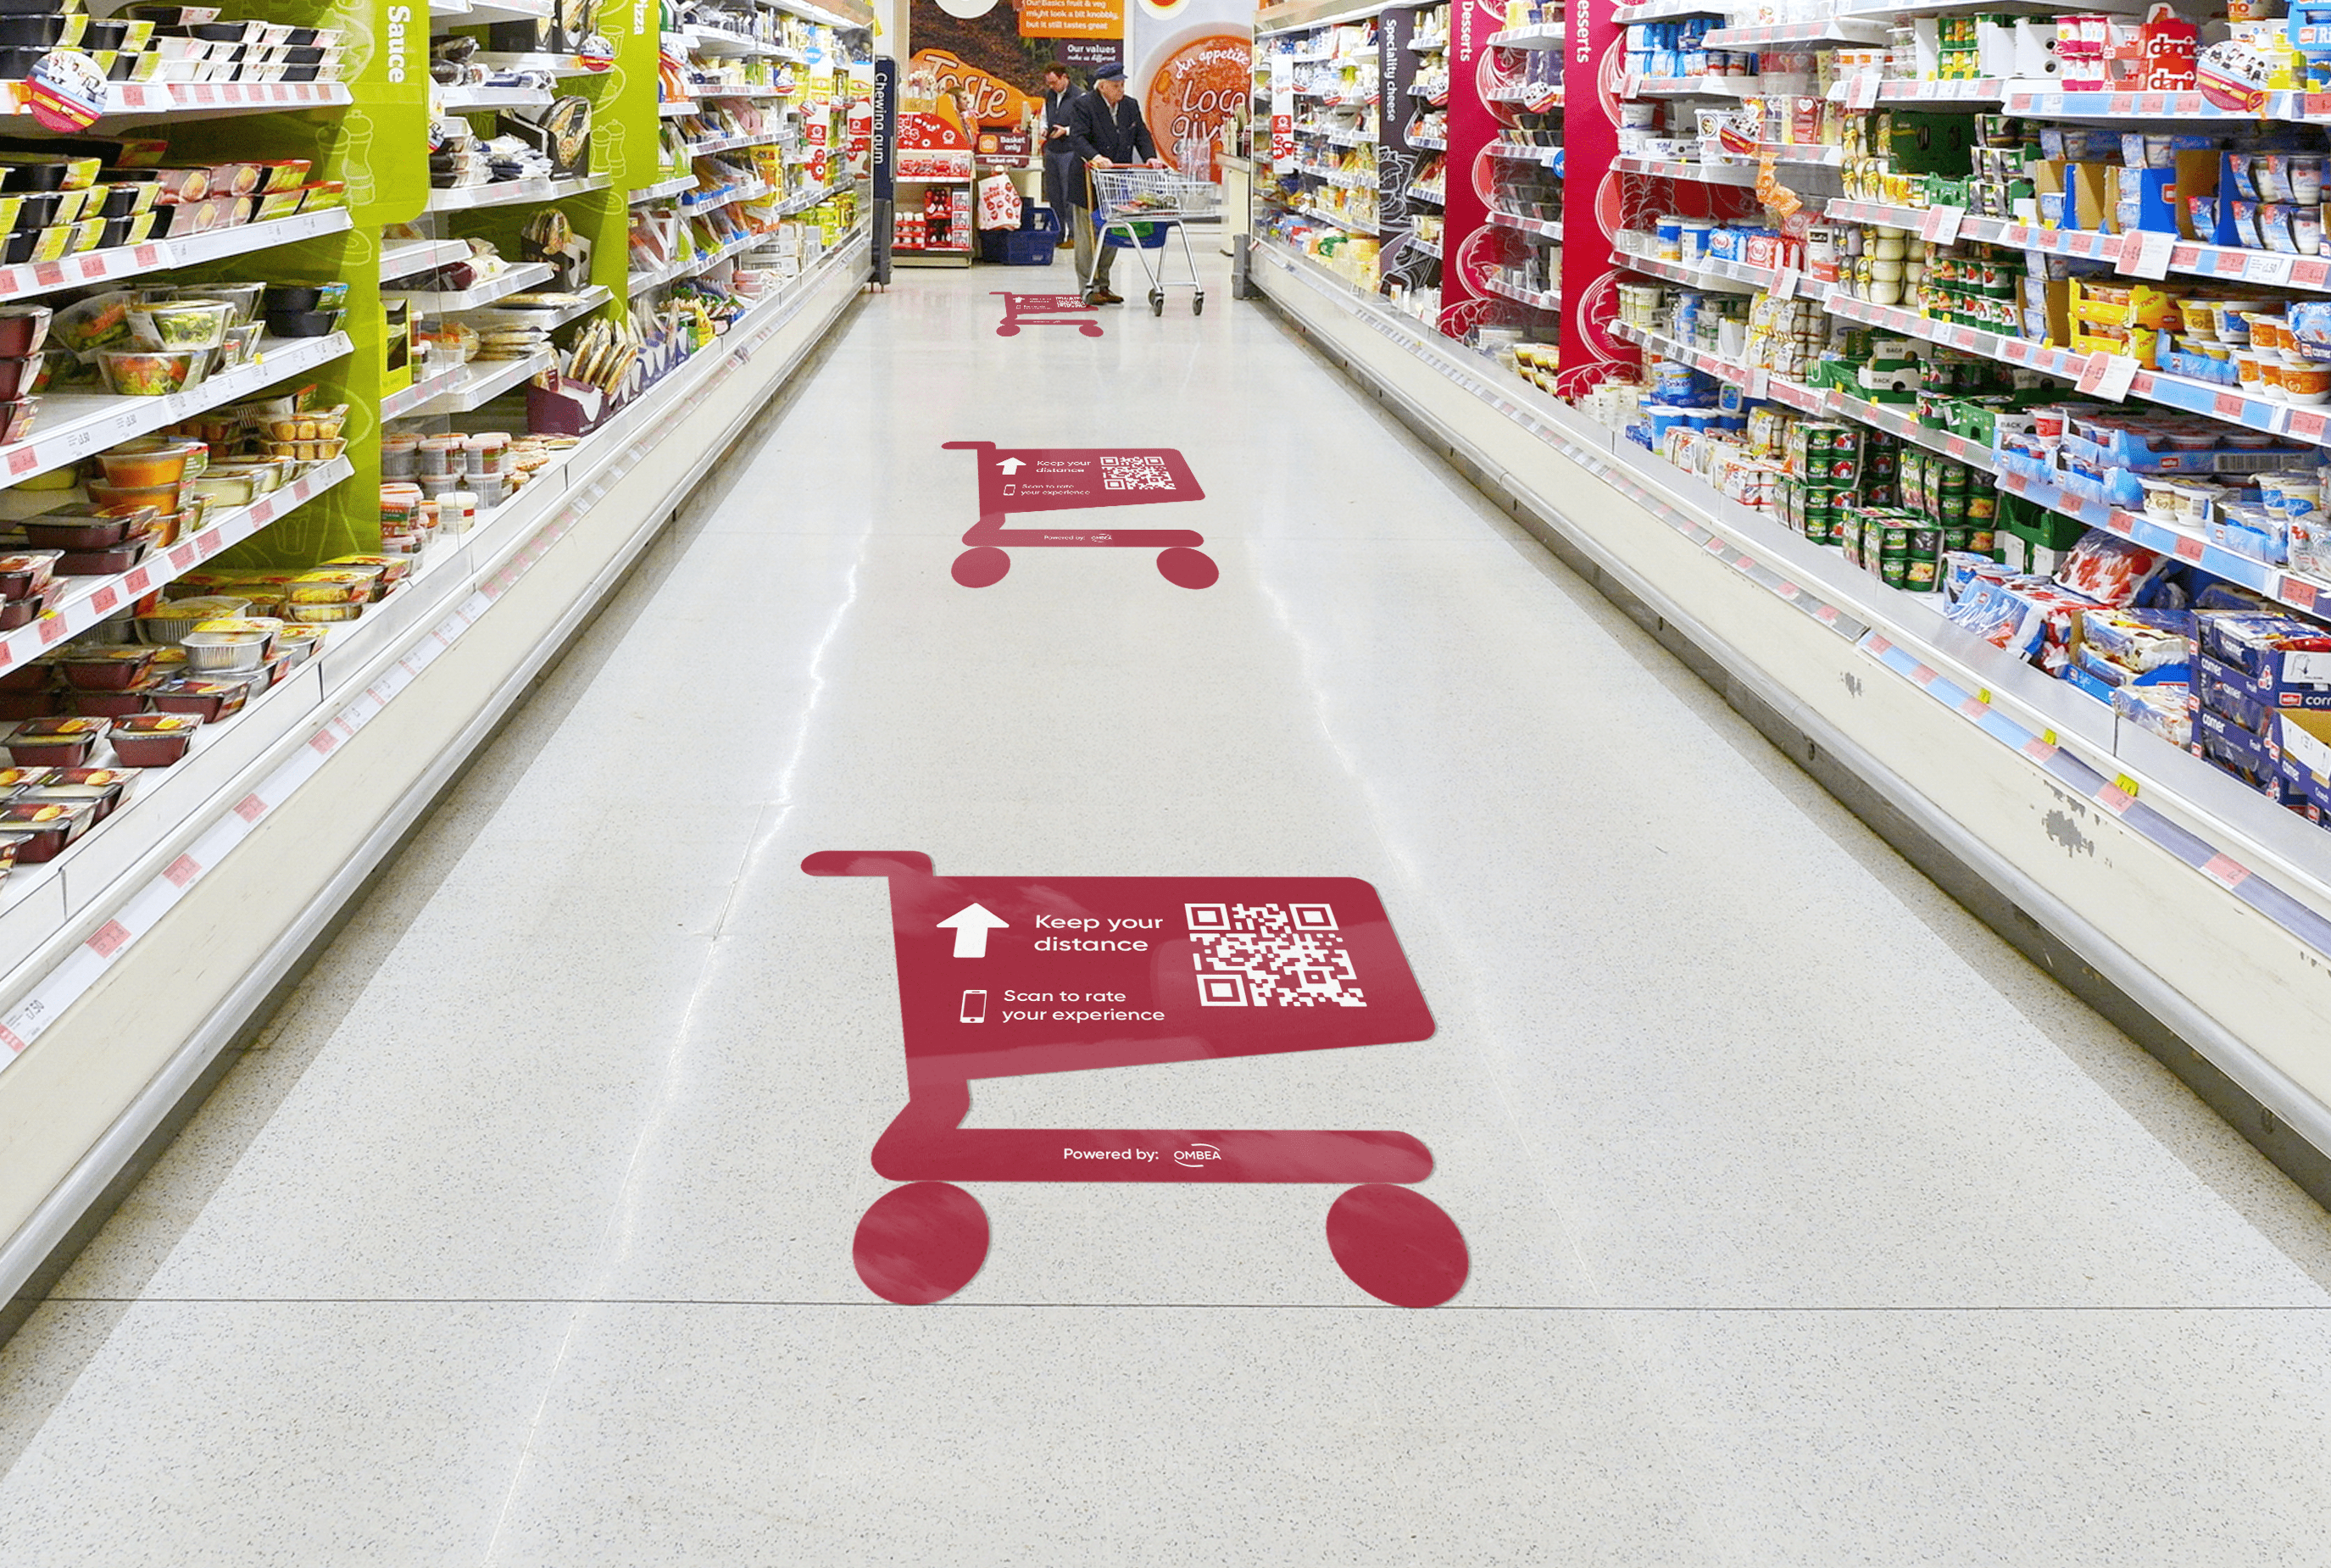 QR Codes on the floor of a supermarket